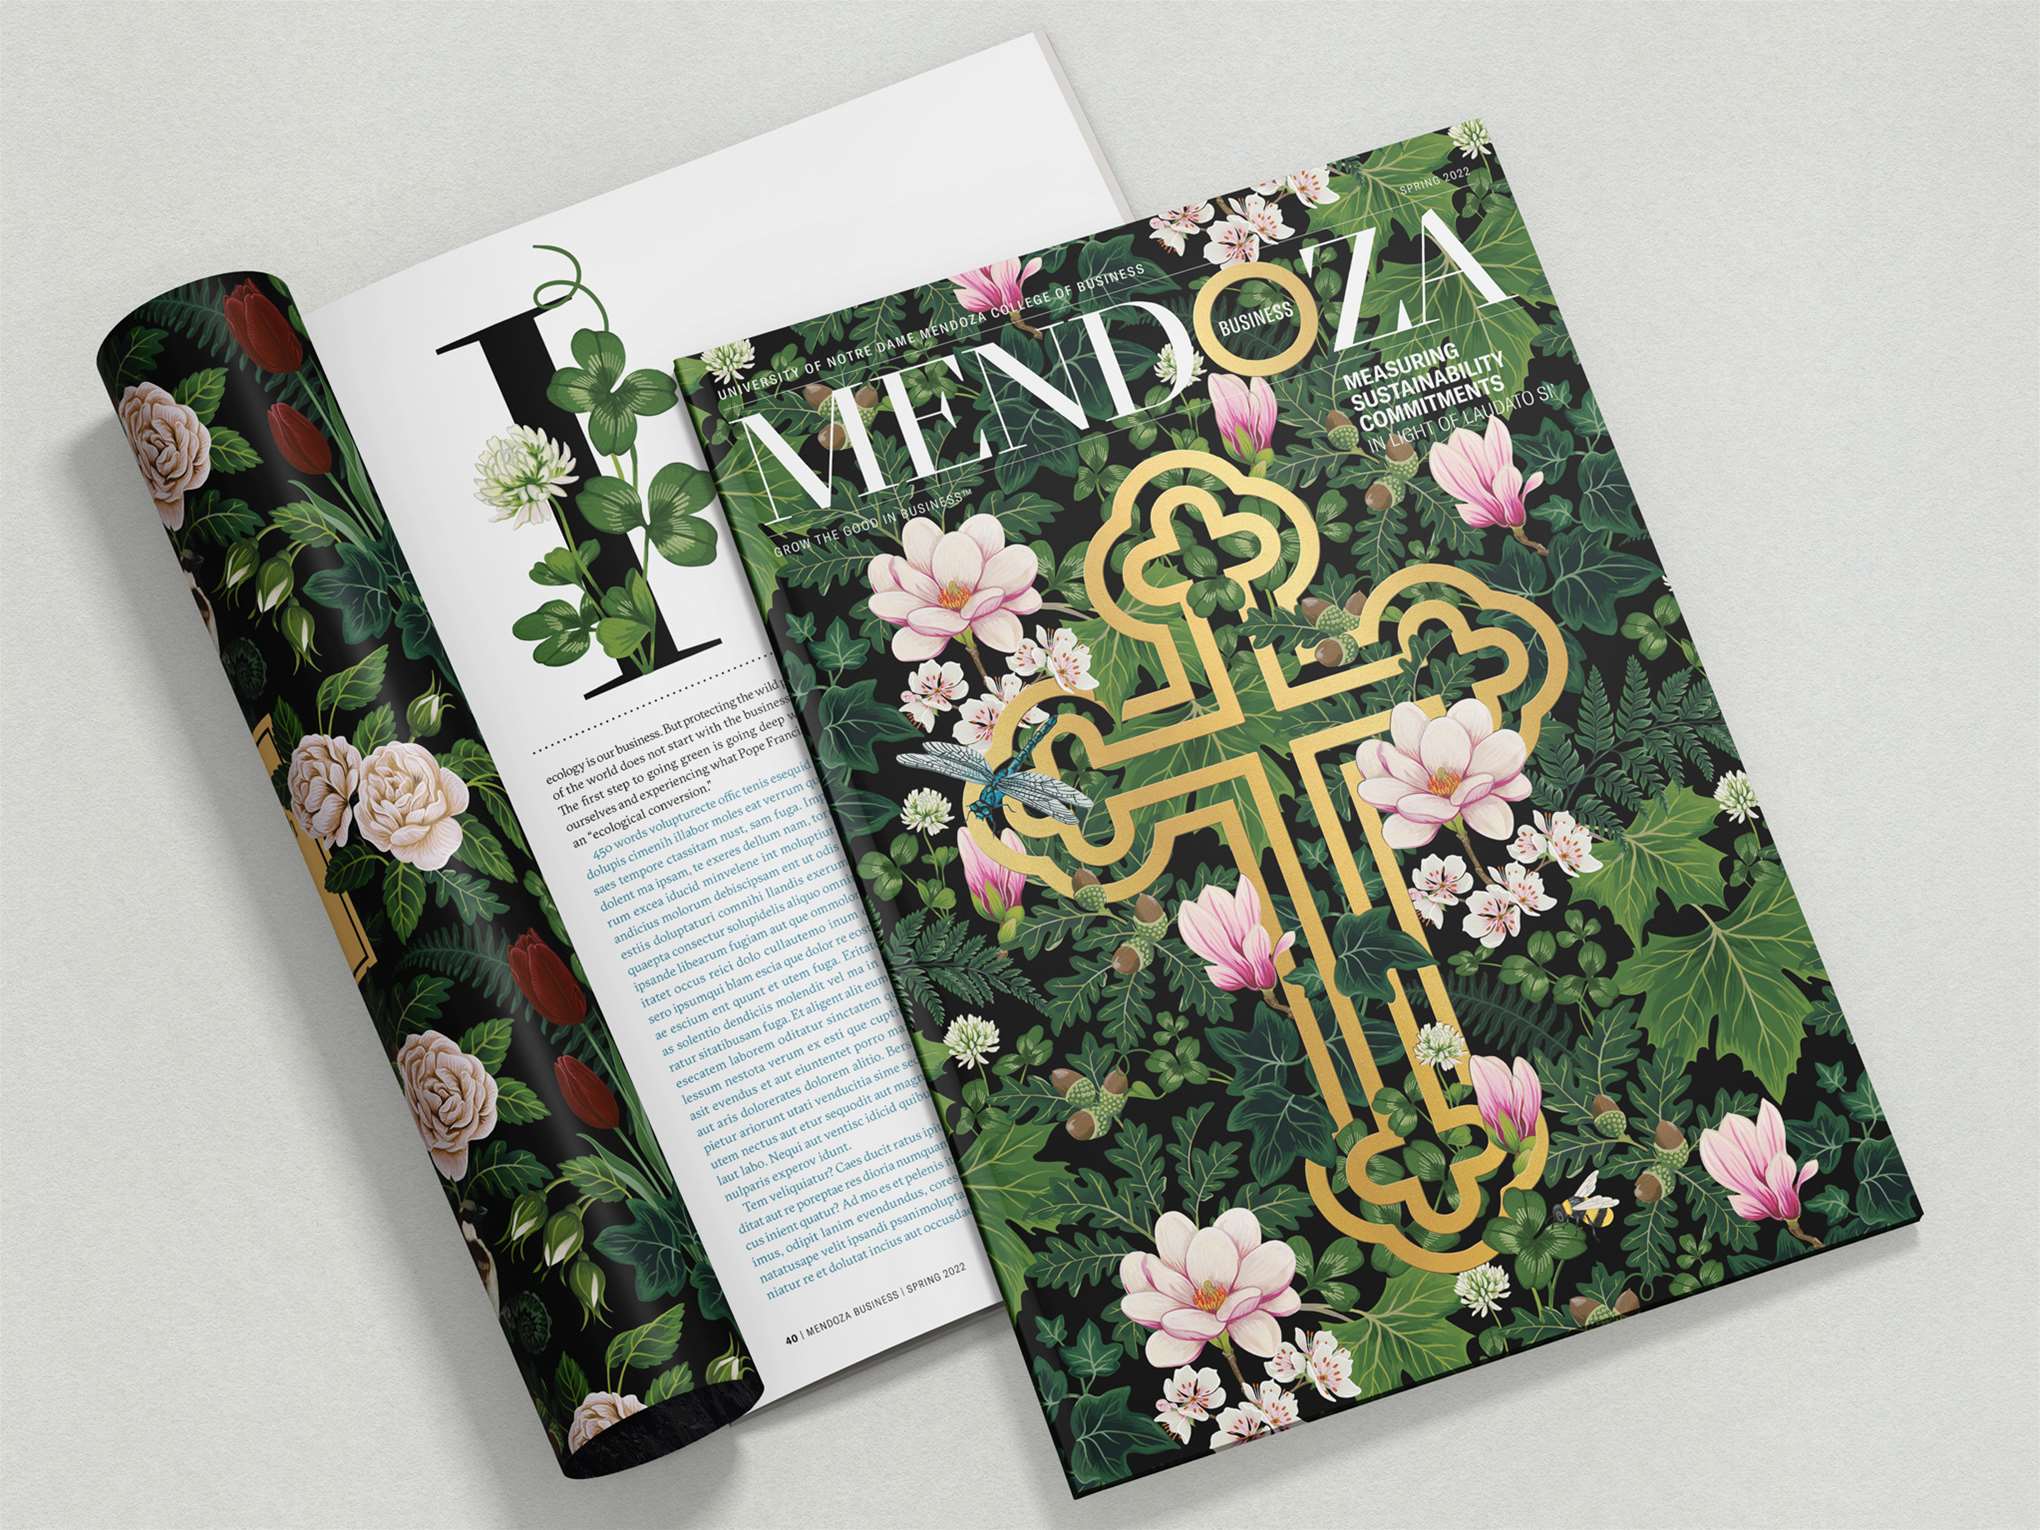 Charlotte Day, Botanical cover artwork for Mendoza Magazine with gold cross surrounded by hand painted florals.